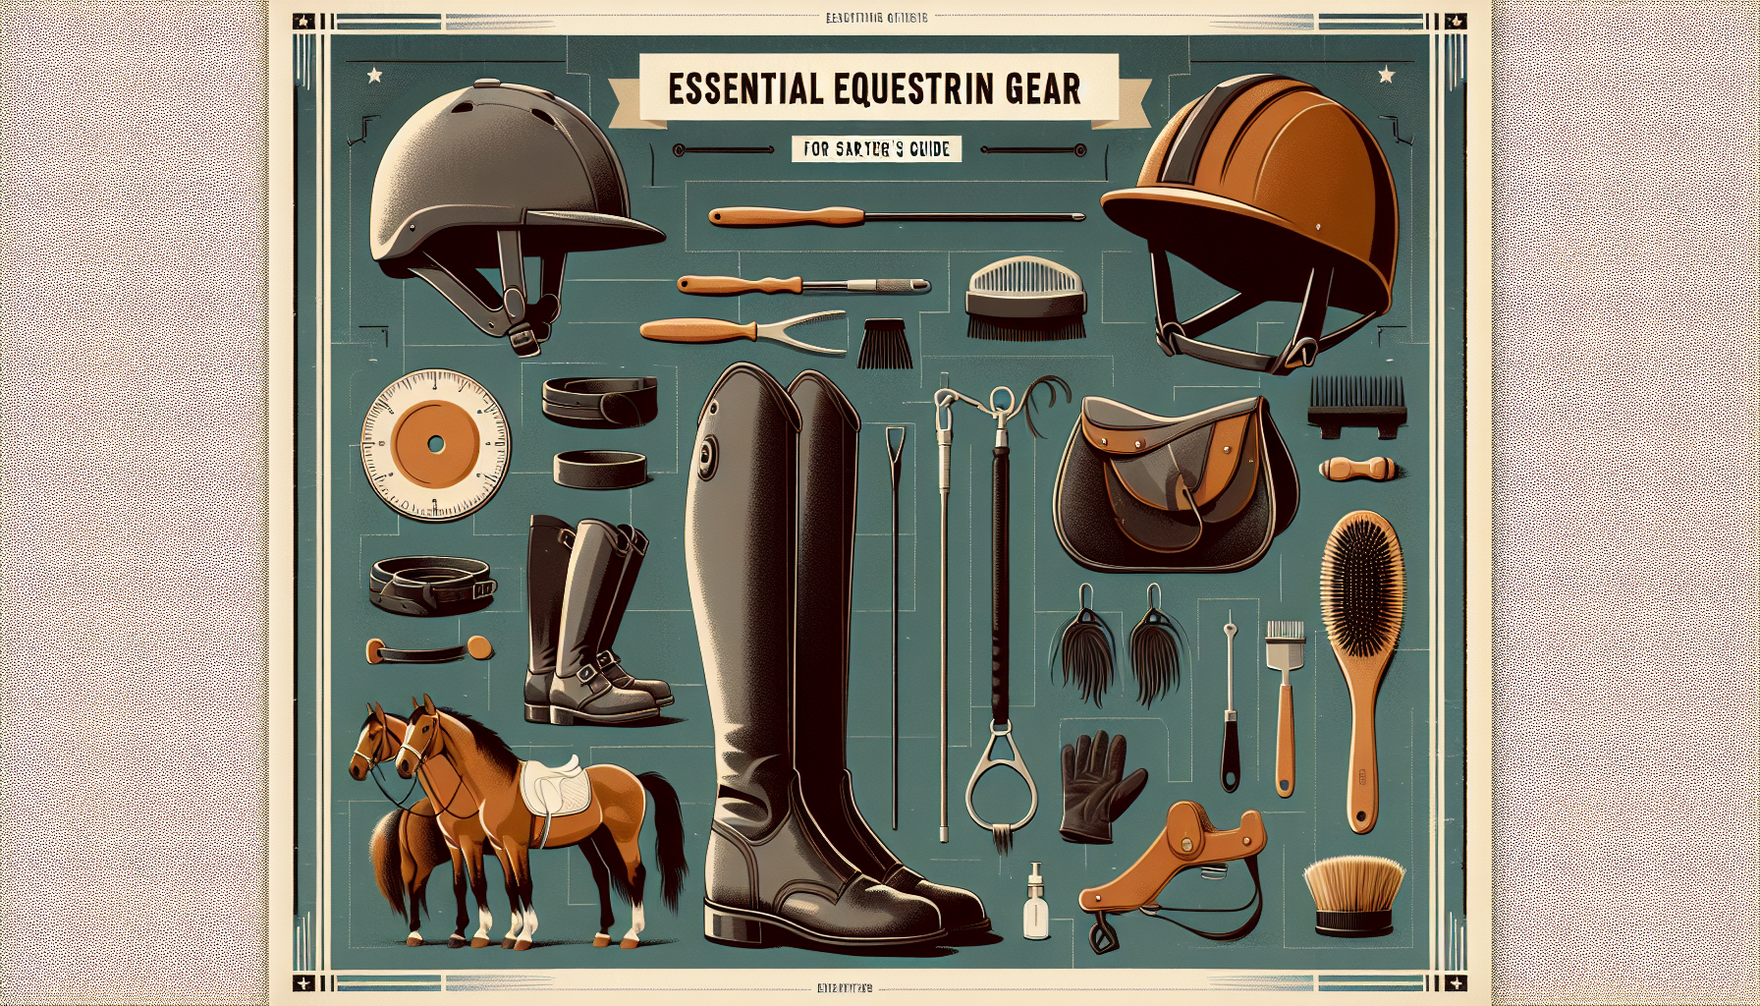 Imagine a visual layout designed like an informative poster. At the top, bold letters spell out 'Essential Equestrian Gear for Beginners: A Starter's Guide.' Below, neatly arranged and spaced apart, a